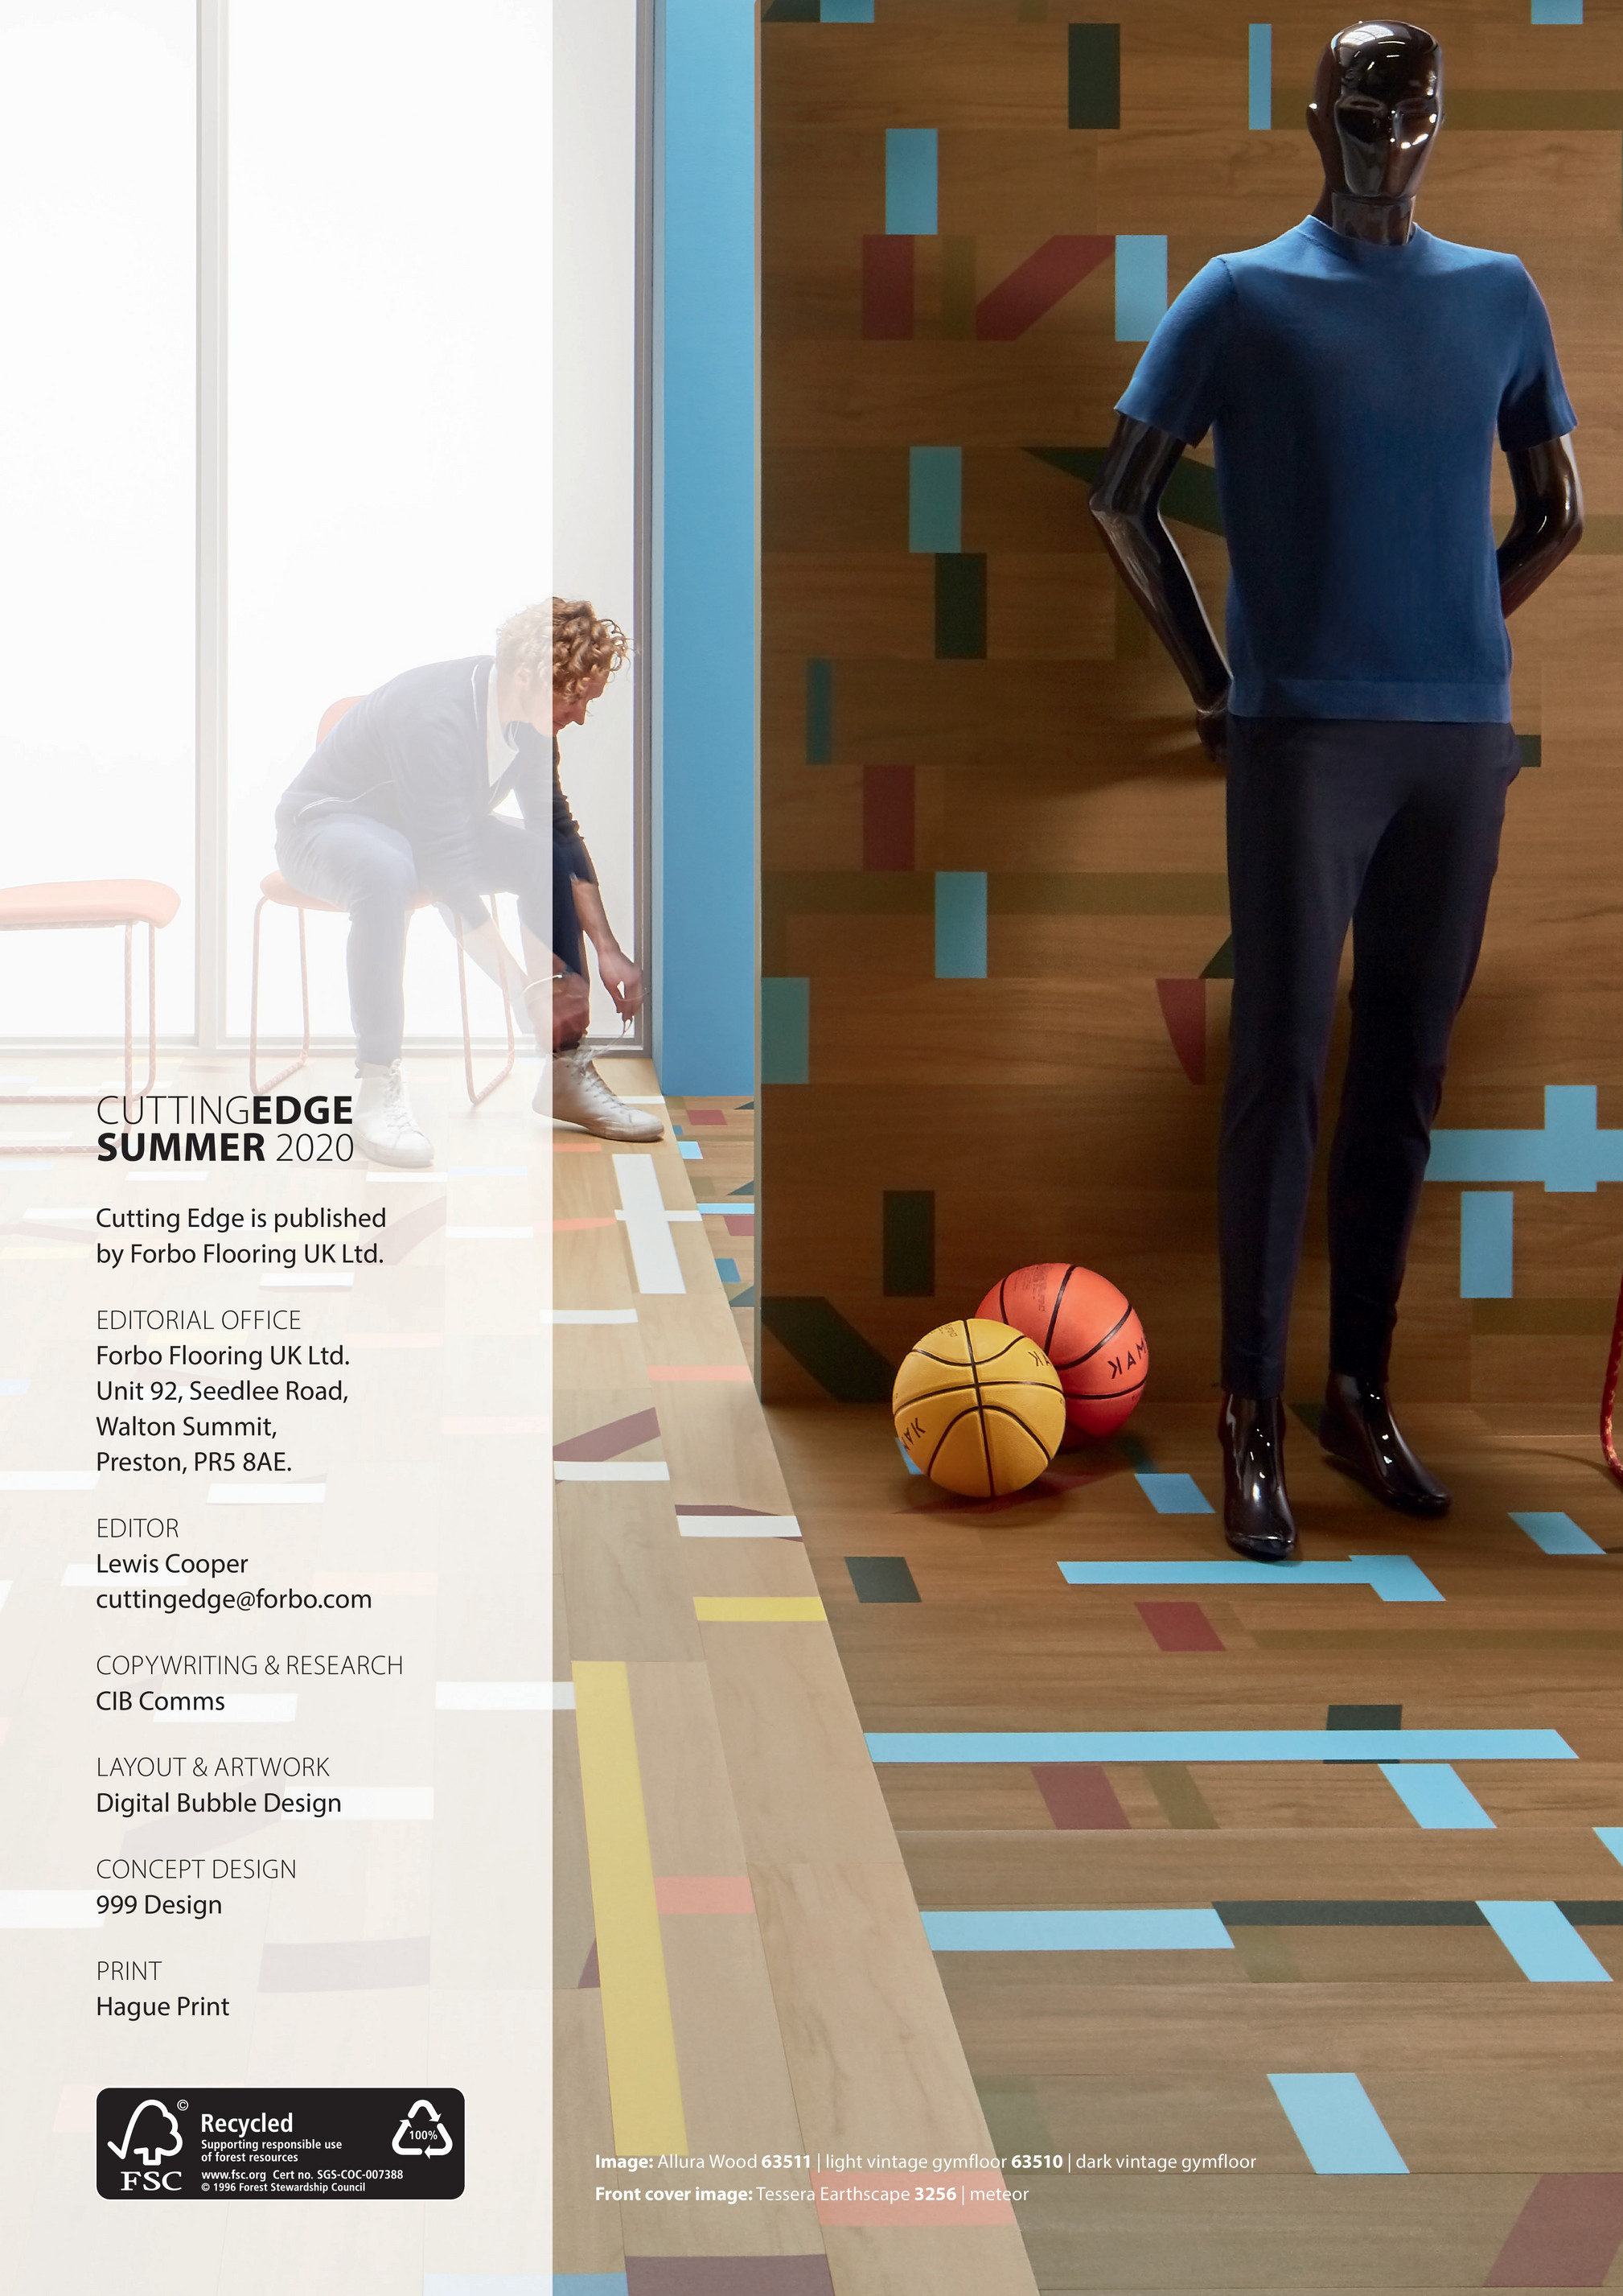 Forboflooring Uk Forbo Cutting Edge Summer 2020 Page 12 13